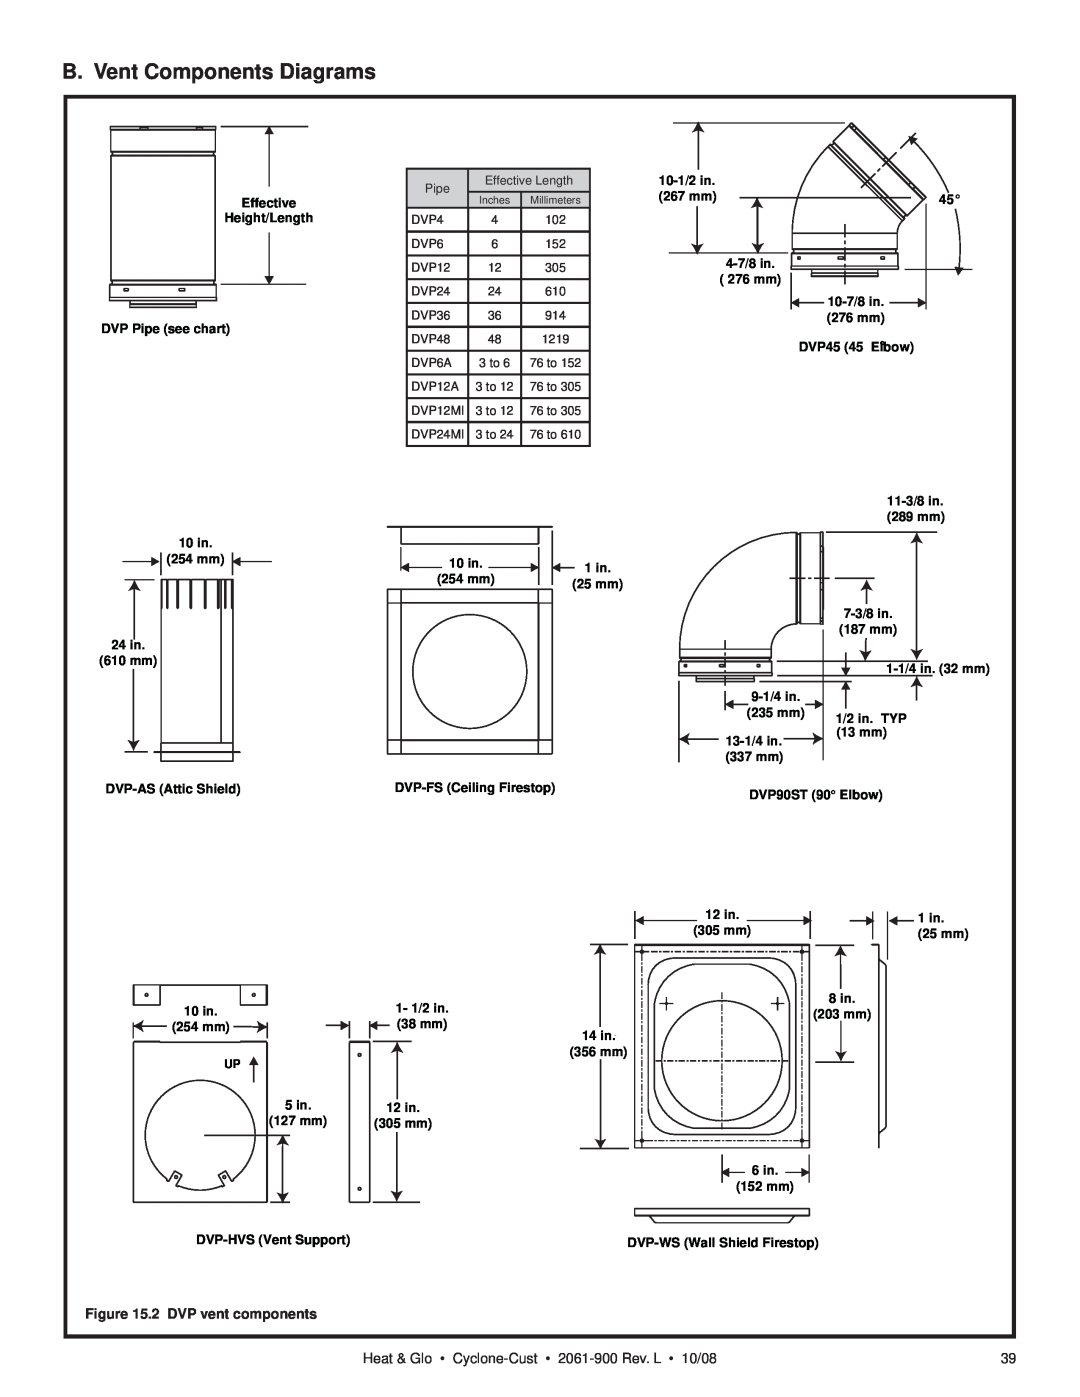 Hearth and Home Technologies owner manual B. Vent Components Diagrams, Heat & Glo Cyclone-Cust 2061-900 Rev. L 10/08 